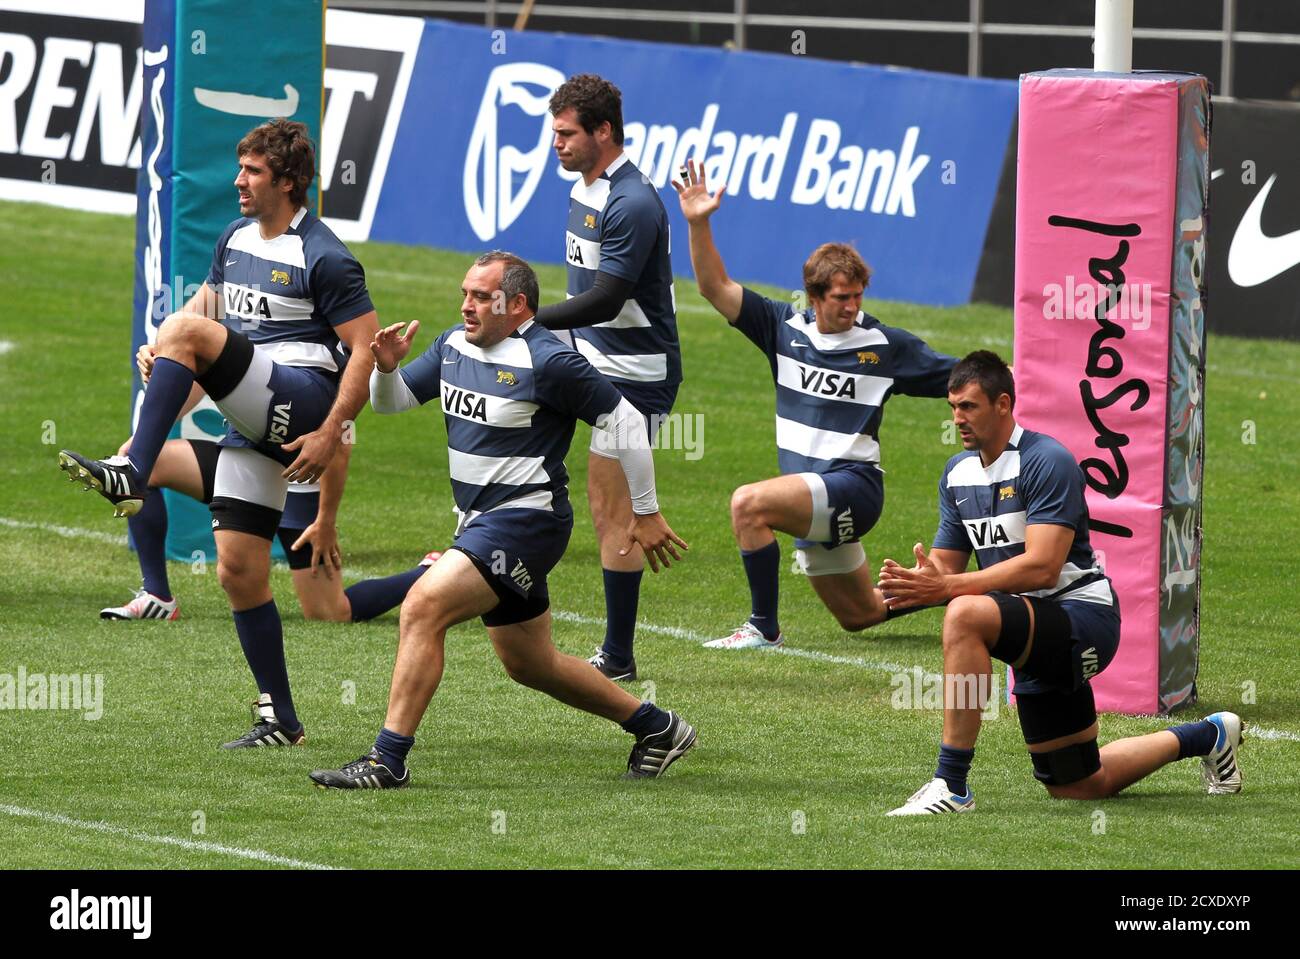 Players of Argentina's Los Pumas rugby team warm up before a practice session at the Estadio Unico in La Plata September 28, Argentina's Los Pumas will clash with Zealand's All